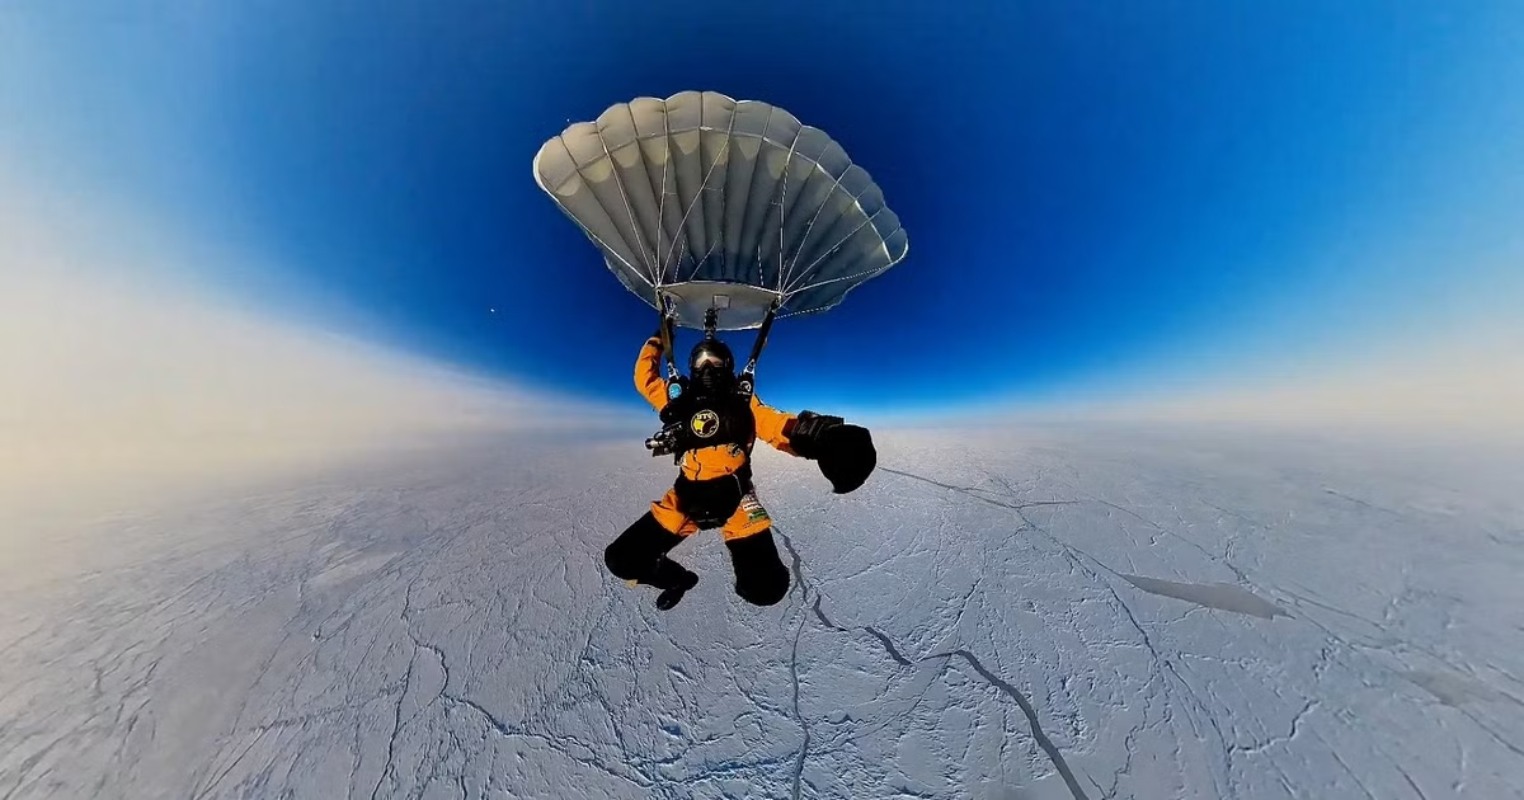 3 Russian citizens jumped to the 'North Pole', made a world record